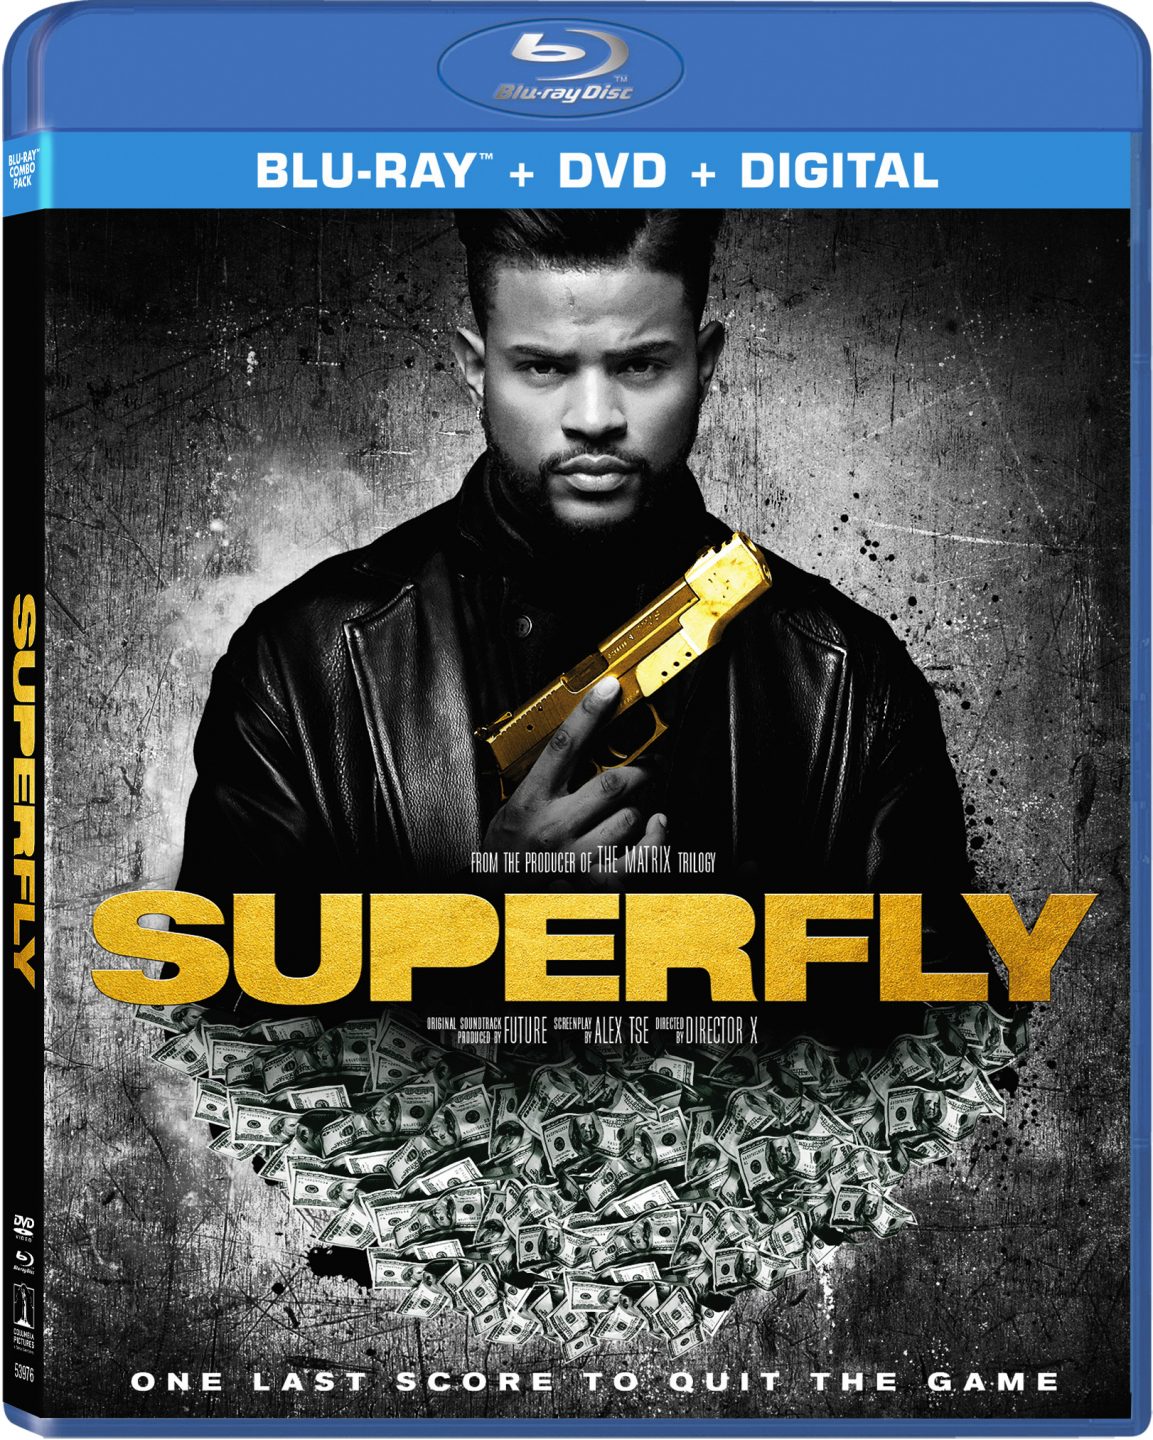 Superfly Blu-Ray Combo Pack cover (Sony Pictures Home Entertainment)